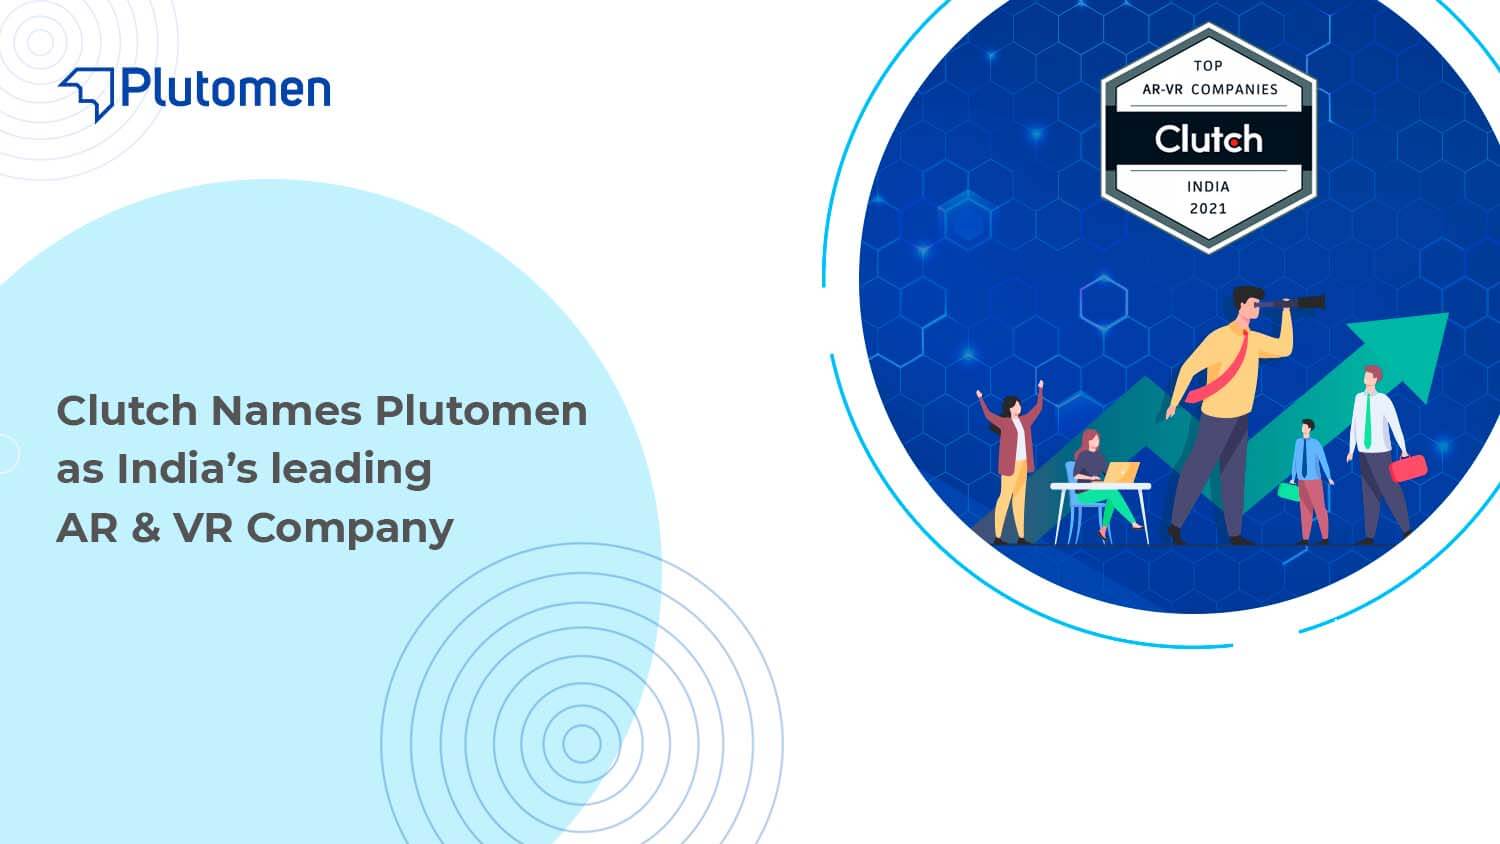 Clutch Named Plutomen as the Leading AR & VR Company In India